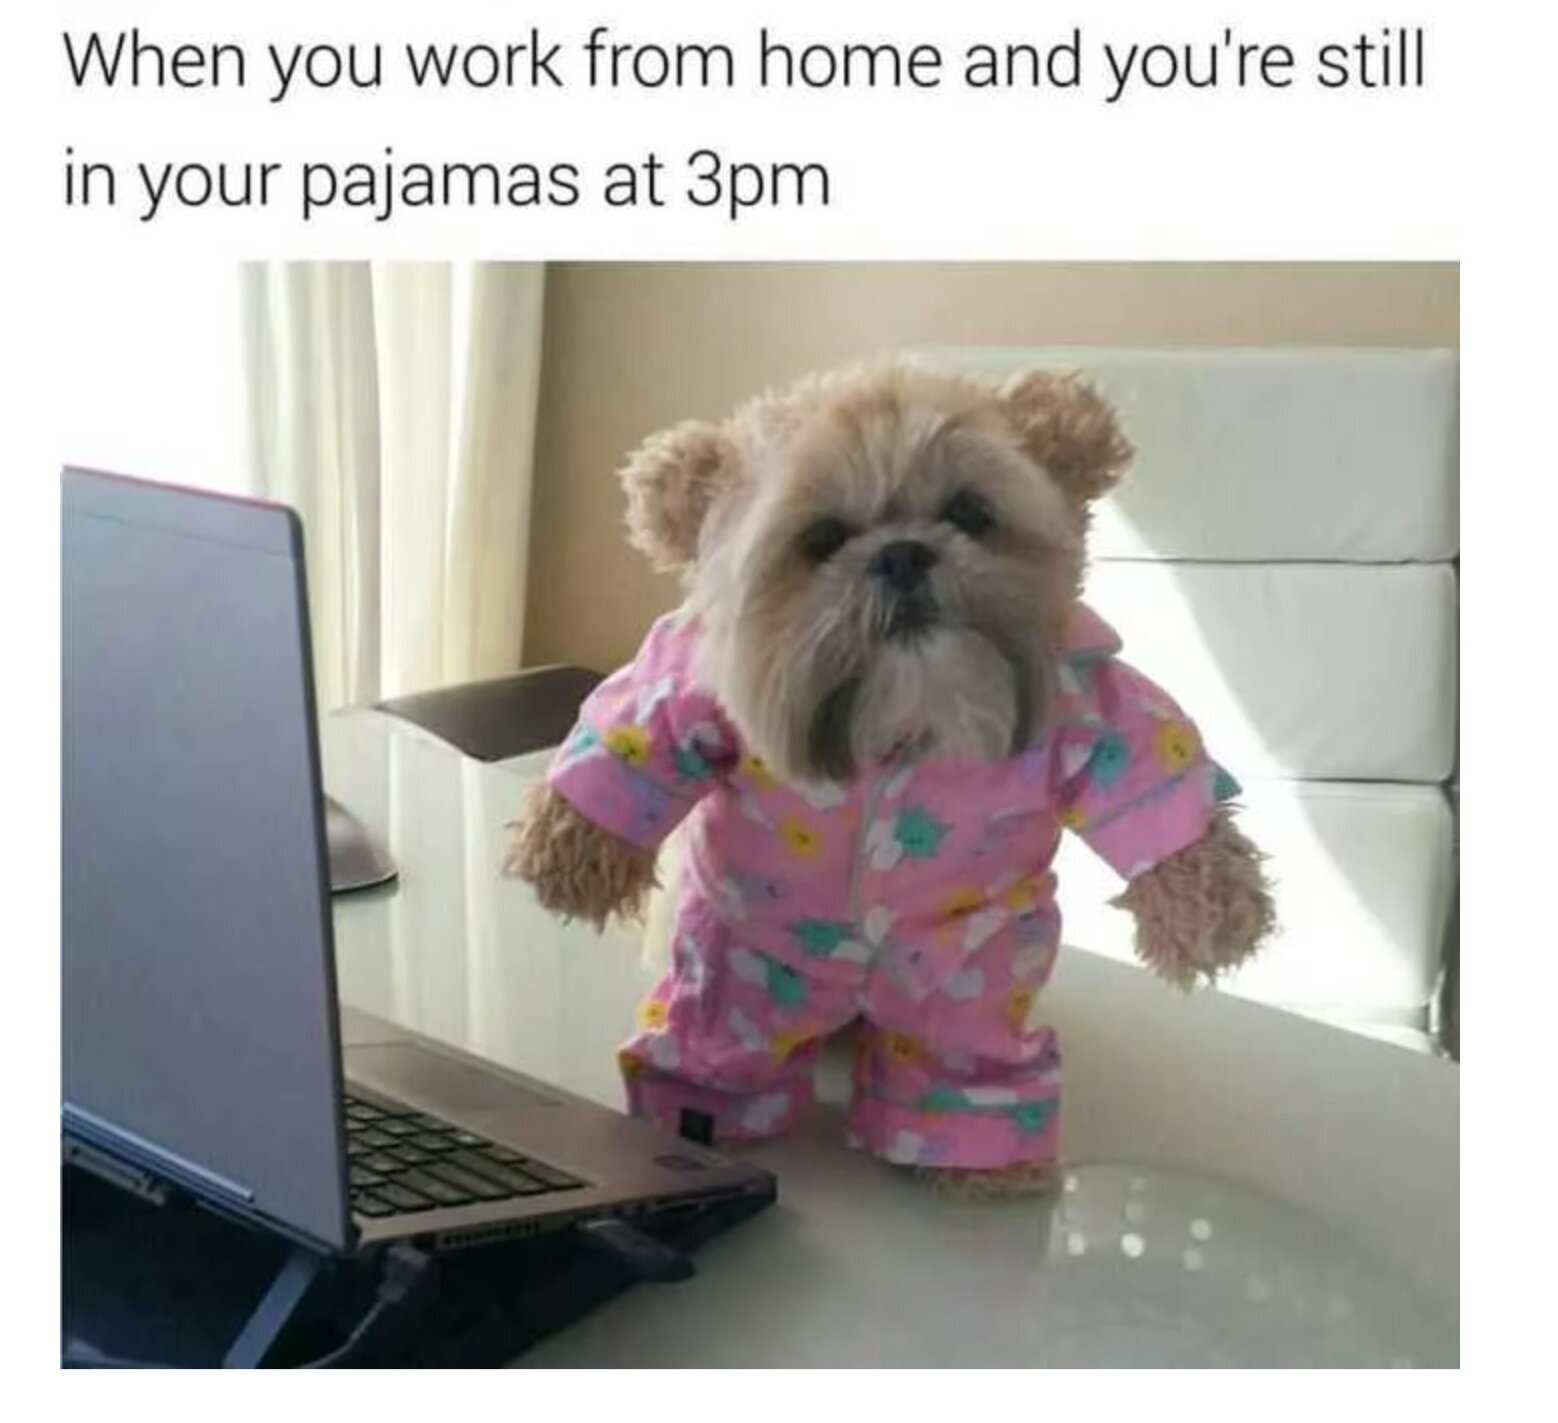 16 working from home memes that will make you smile — Loumee